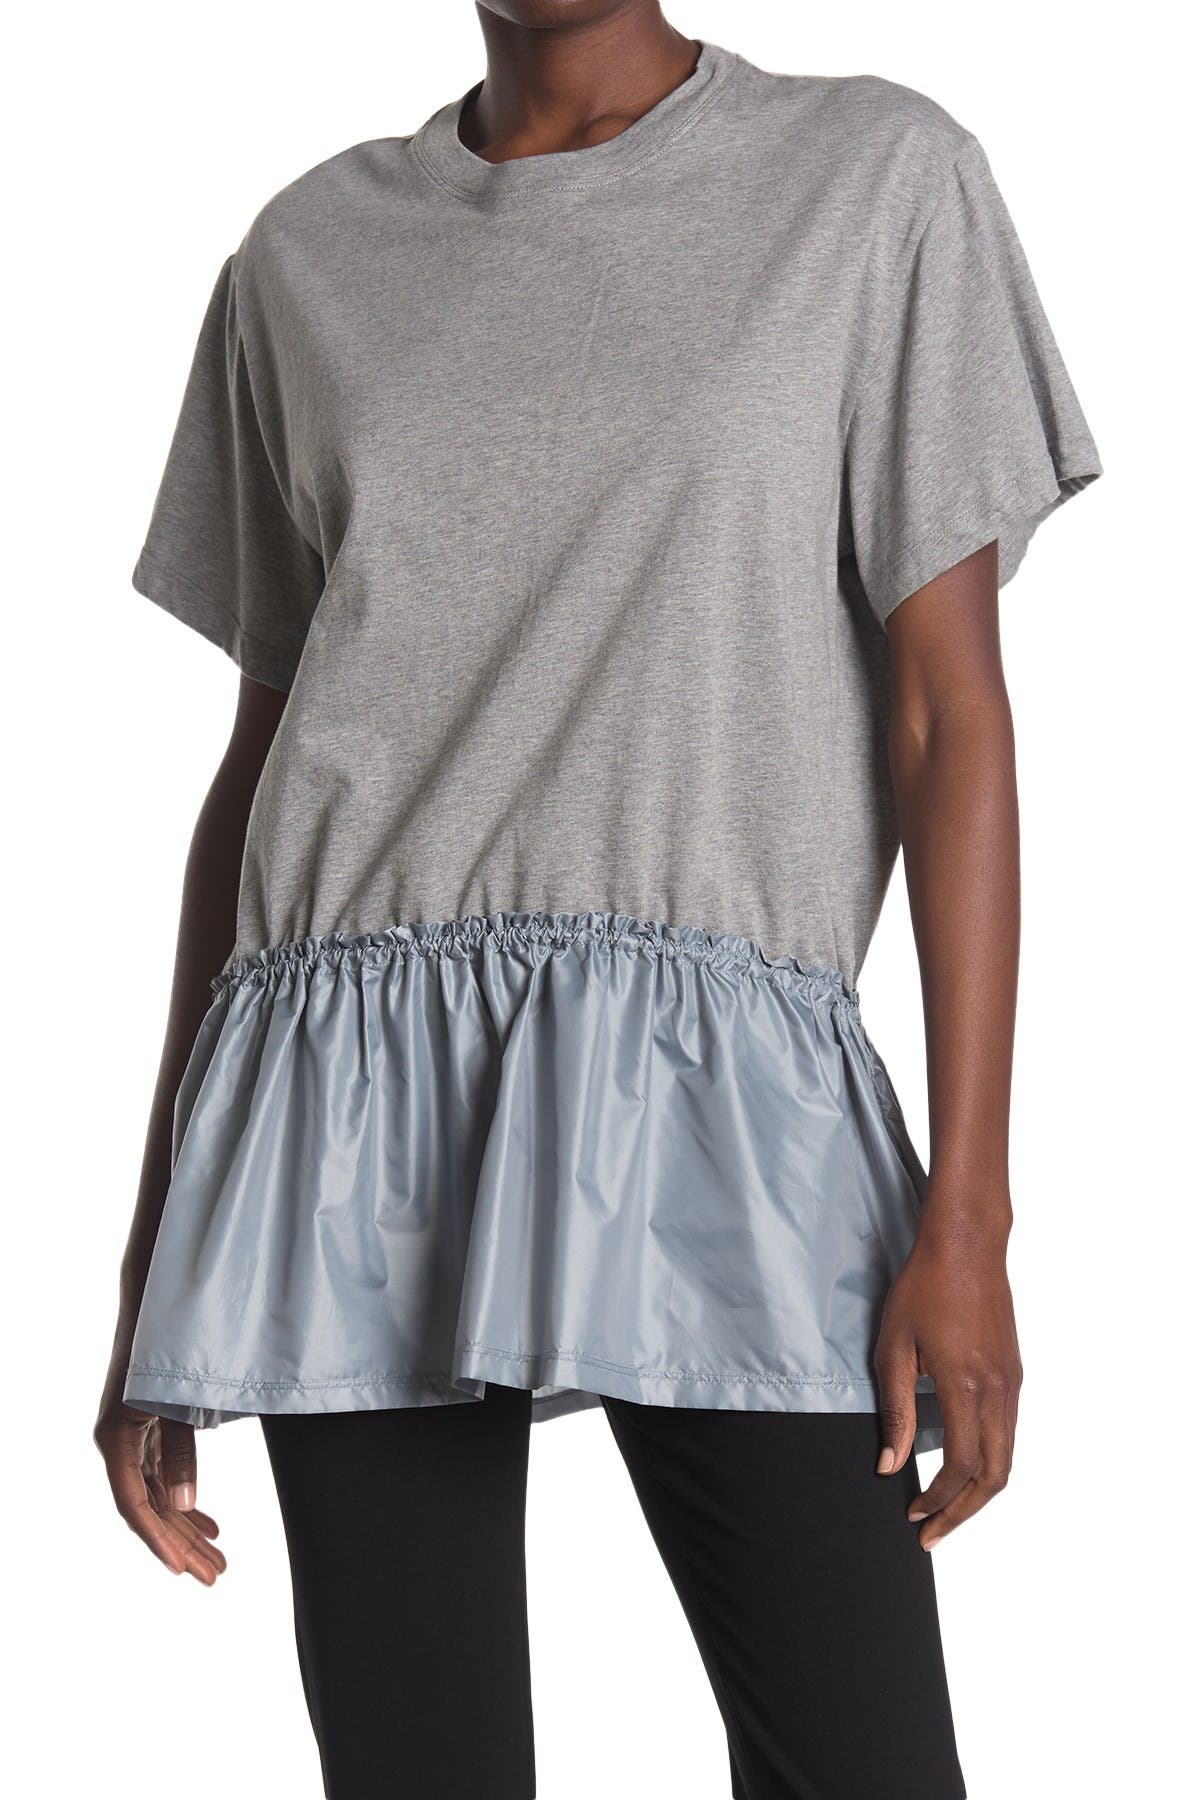 Red Valentino Solid Colorway T-shirt In Grigio Melange/sky